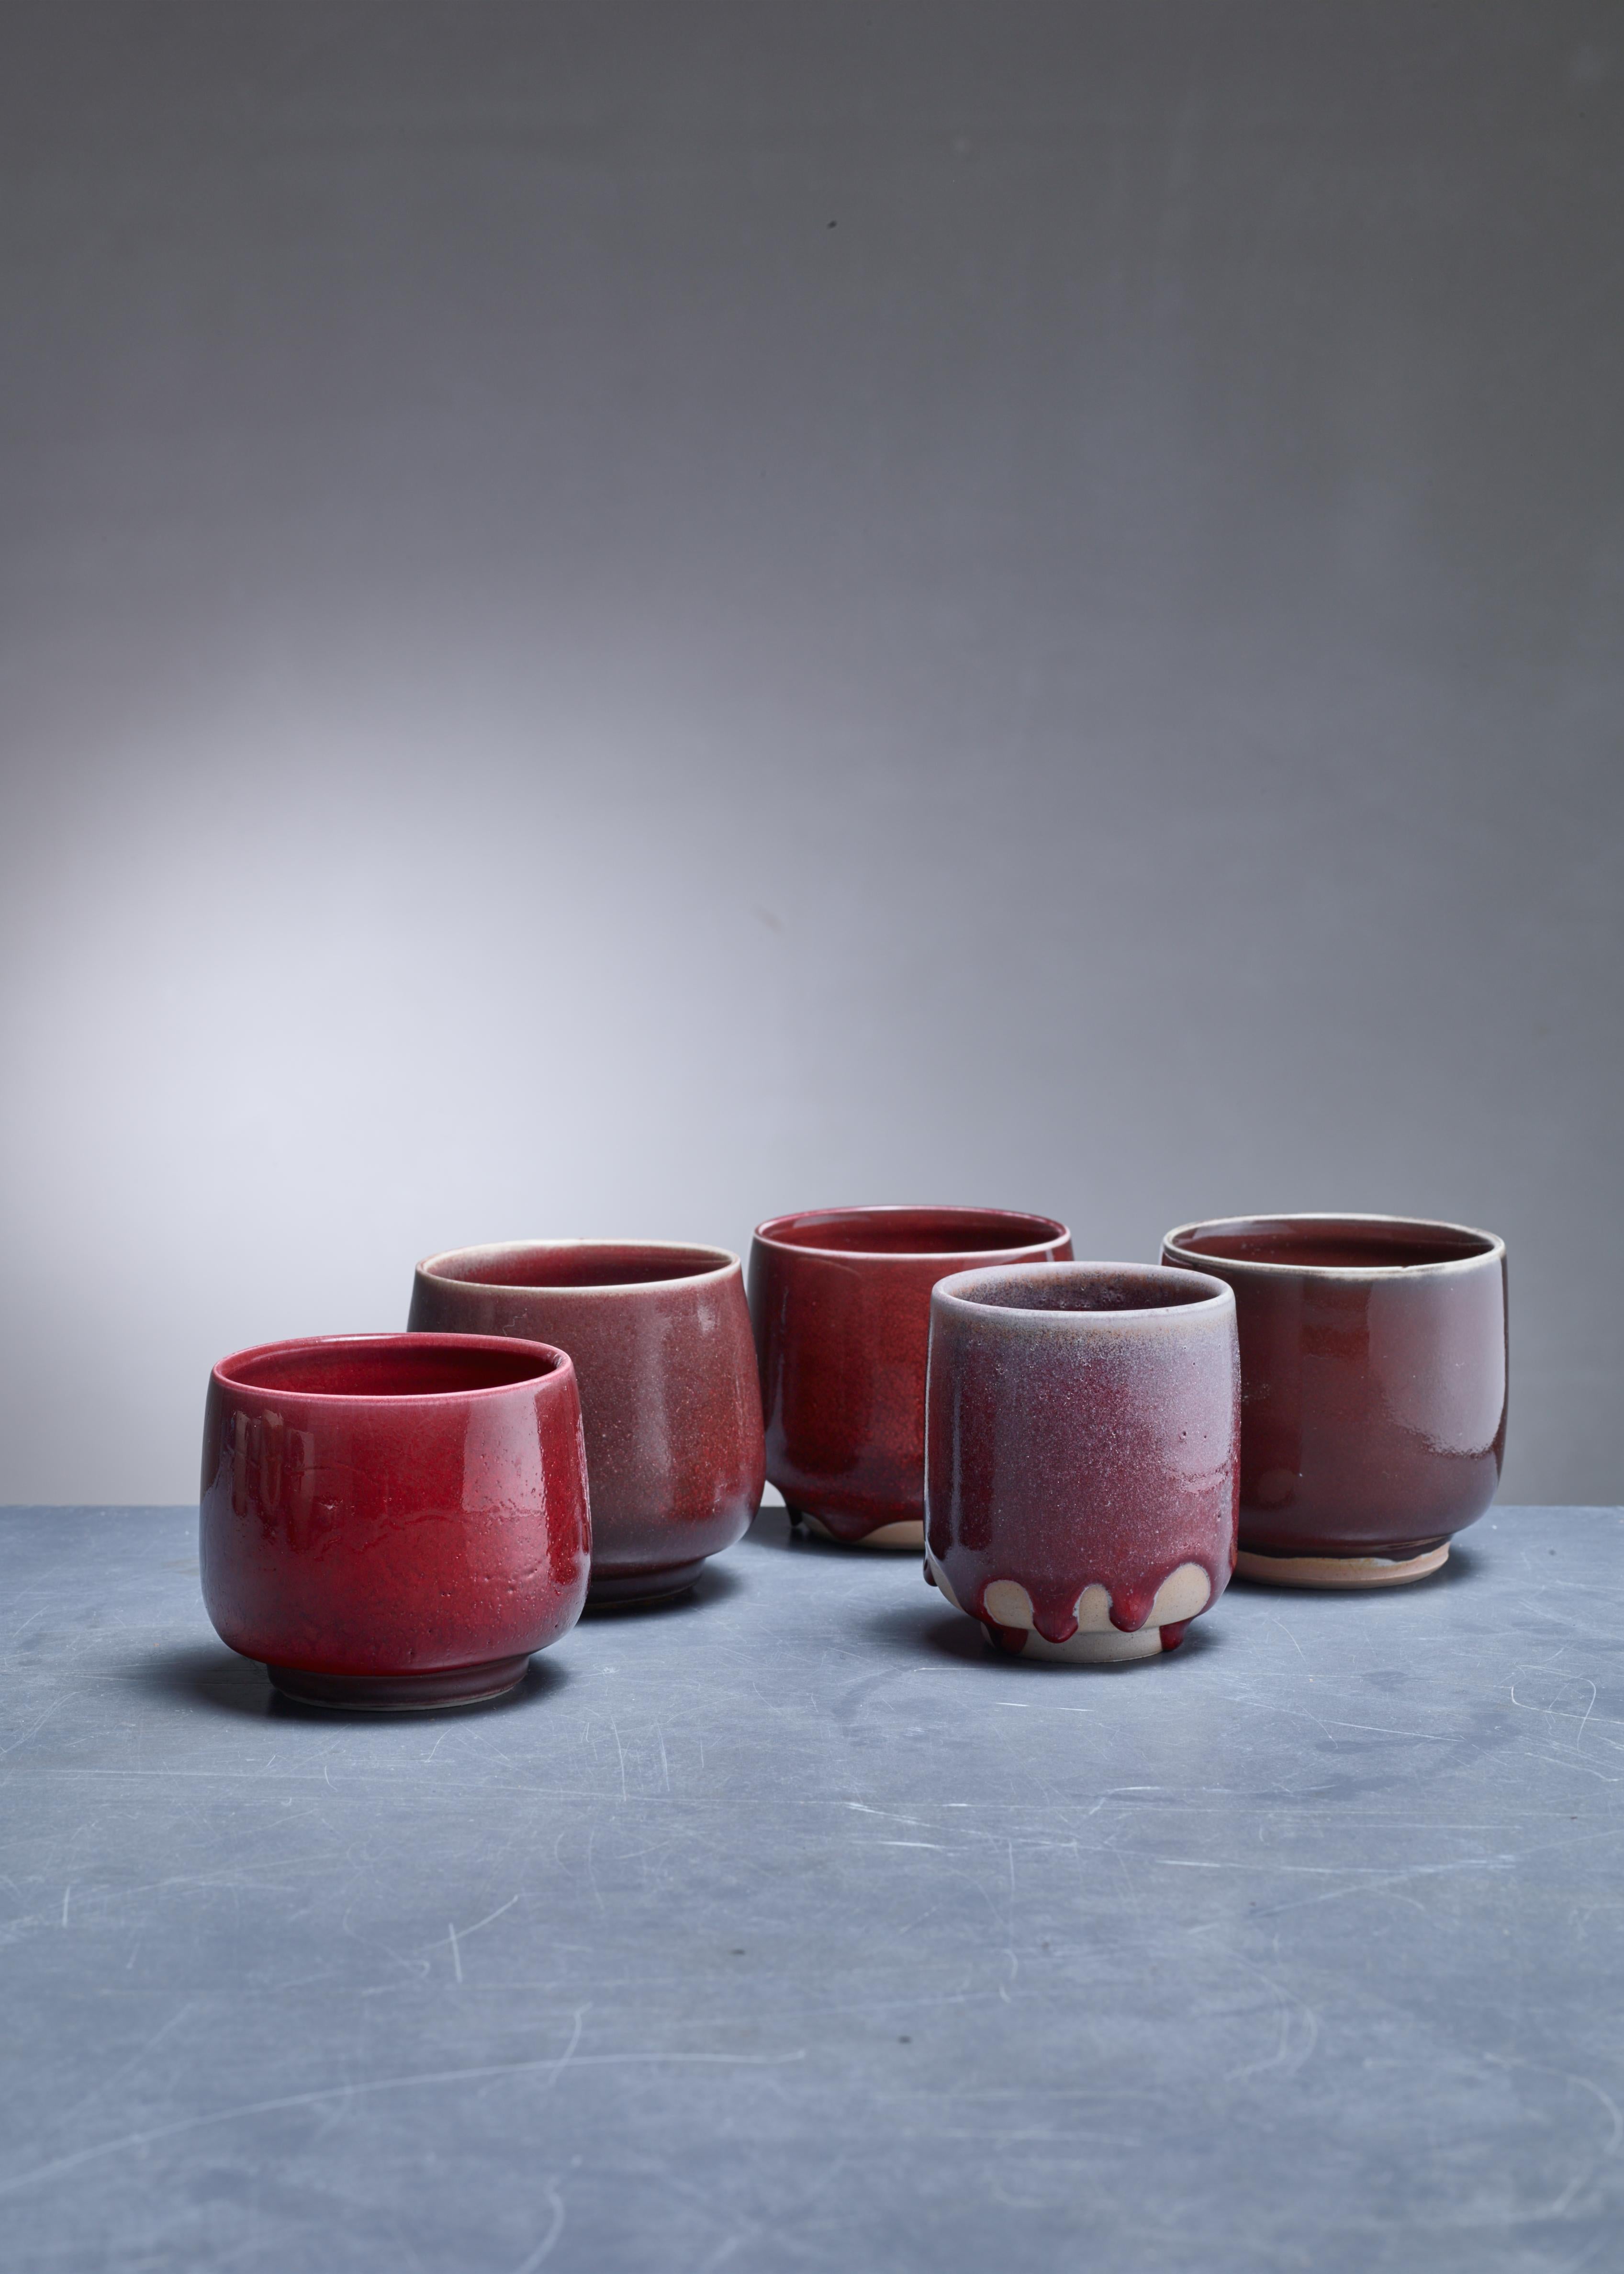 A set of five ceramic vases with a red-brown glaze finish by Rolf Palm.

The pieces are signed by Palm with the year of production (1991 and 1996). Measures: The shortest vase is 8.5 (3.3 inch) high with a 10 cm (4 inch) diameter. The tallest one